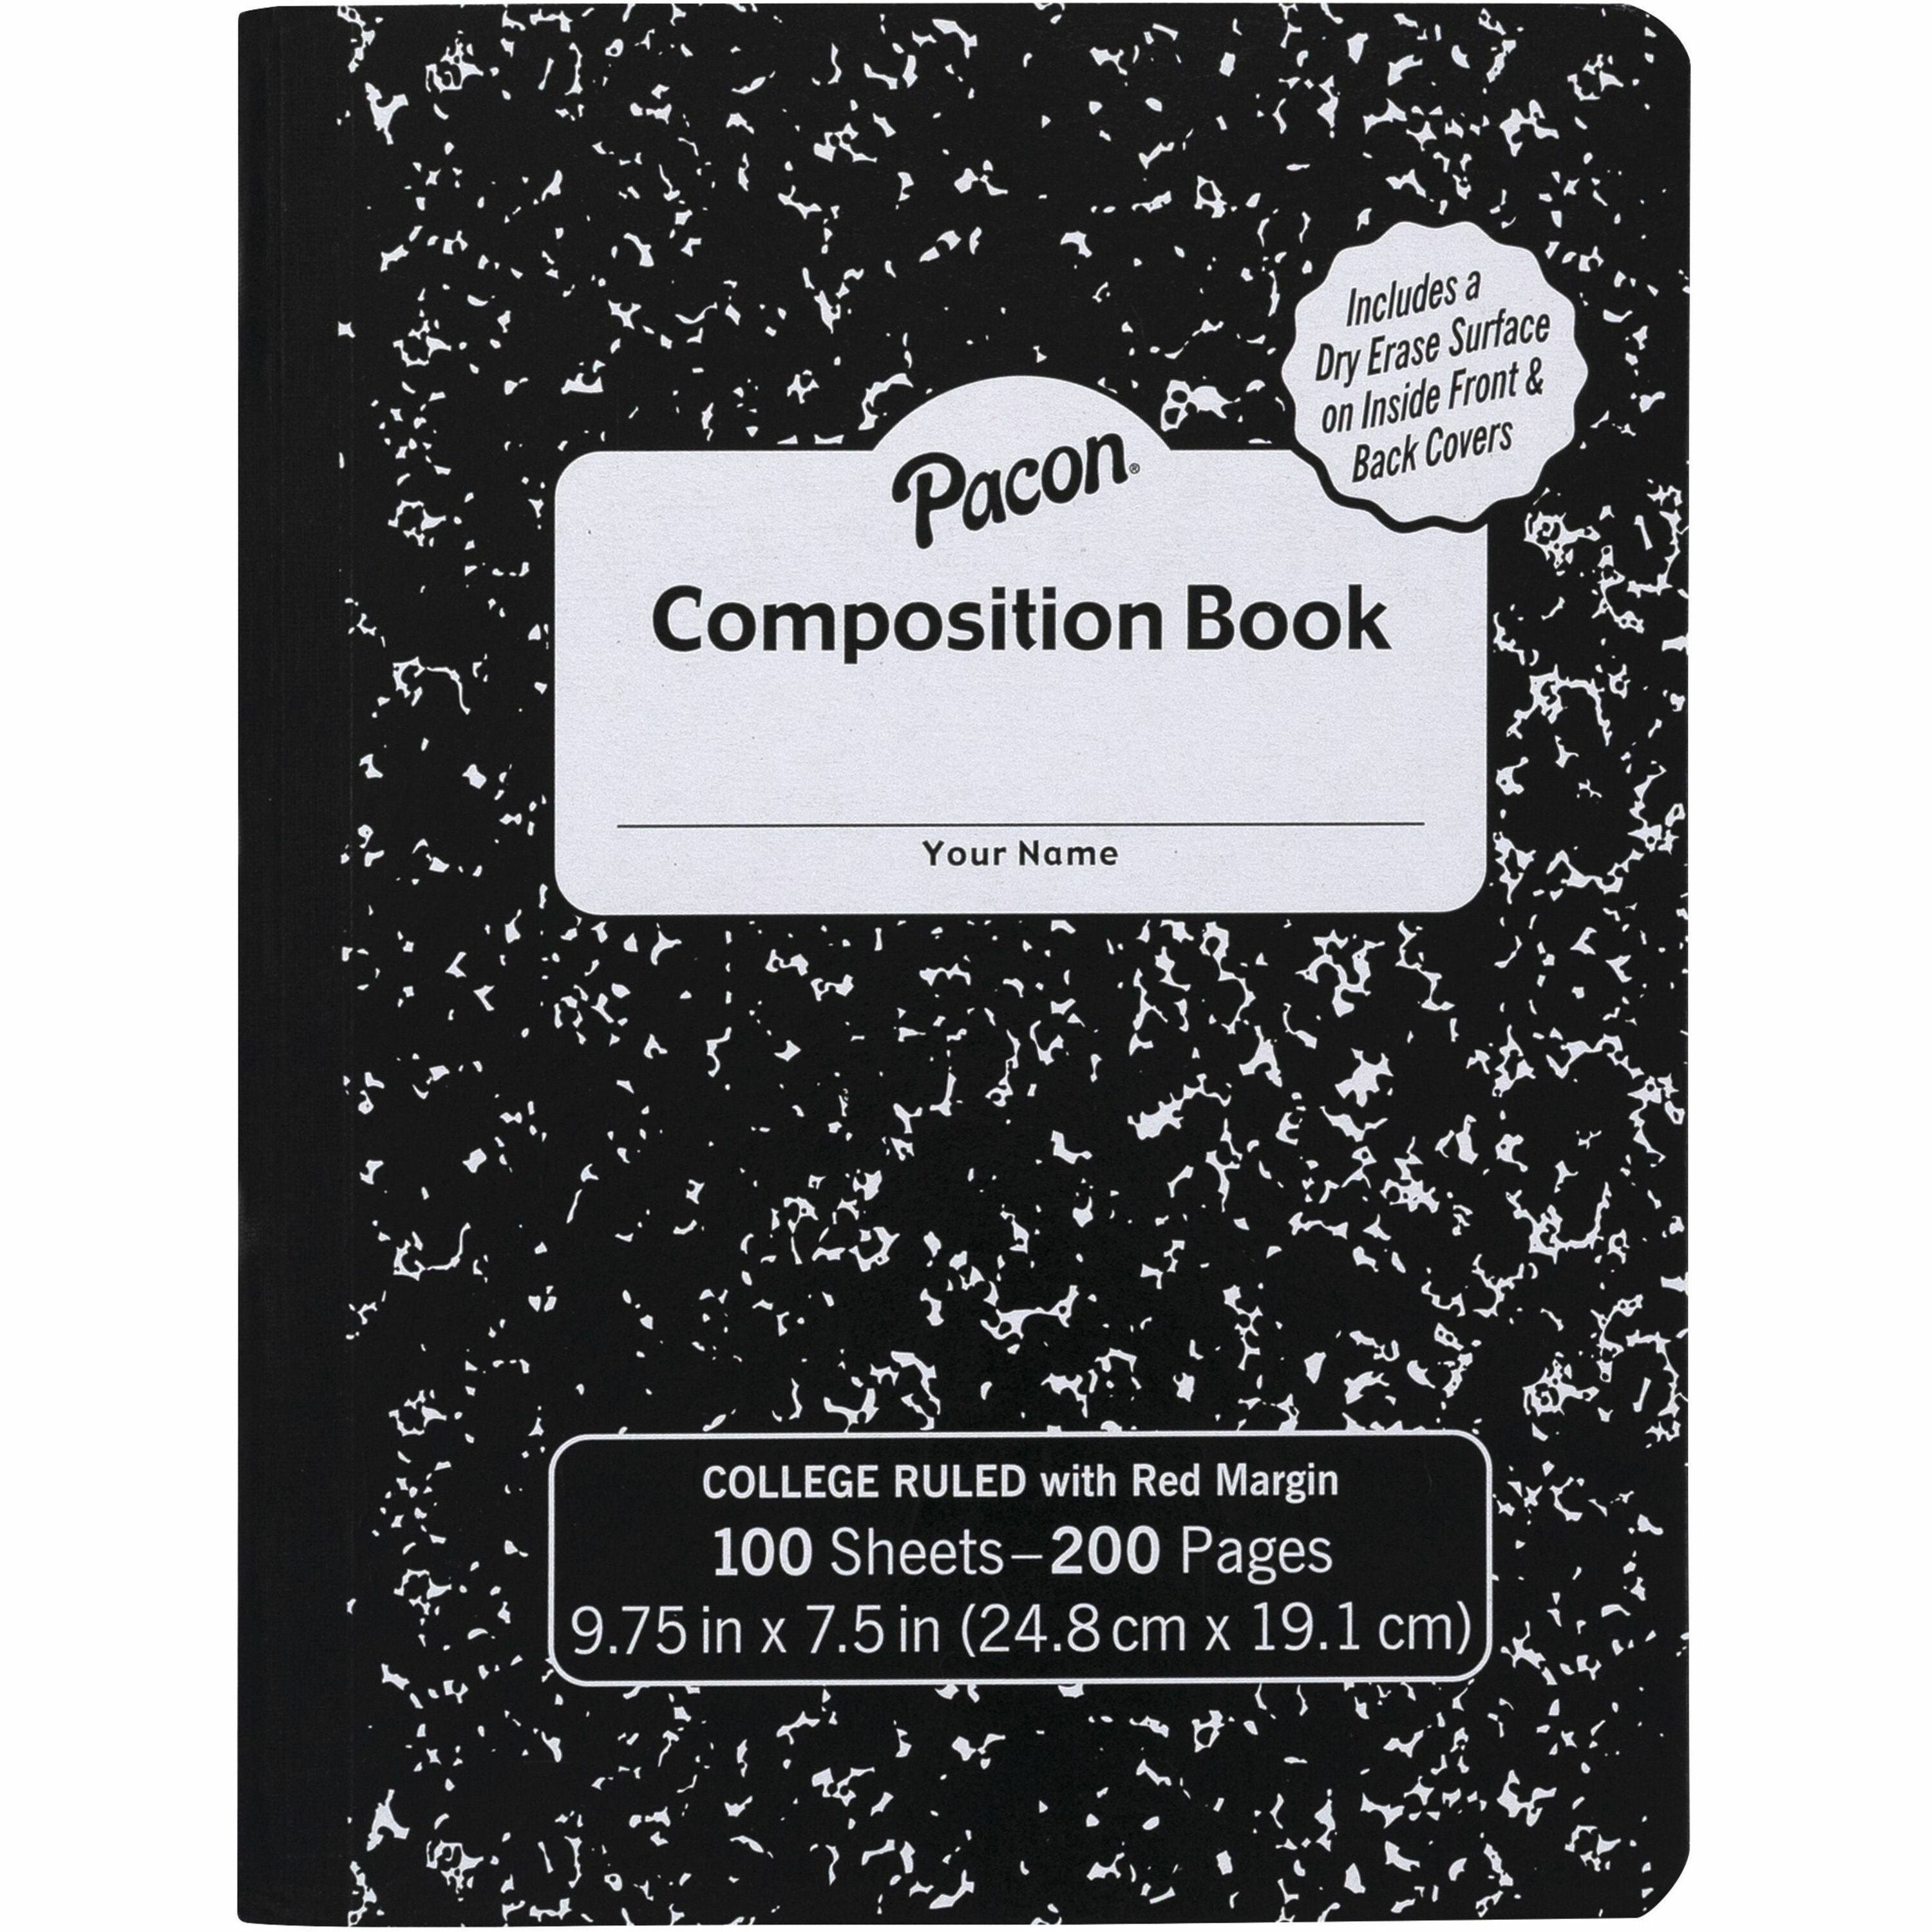 pacon-marble-hard-cover-wide-rule-composition-book-1-subjects-100-sheets-200-pages-wide-ruled-red-margin-975-x-75-x-04-black-marble-cover-recyclable-hard-cover-dry-erase-surface-1-each_pacpmmk37101de - 1